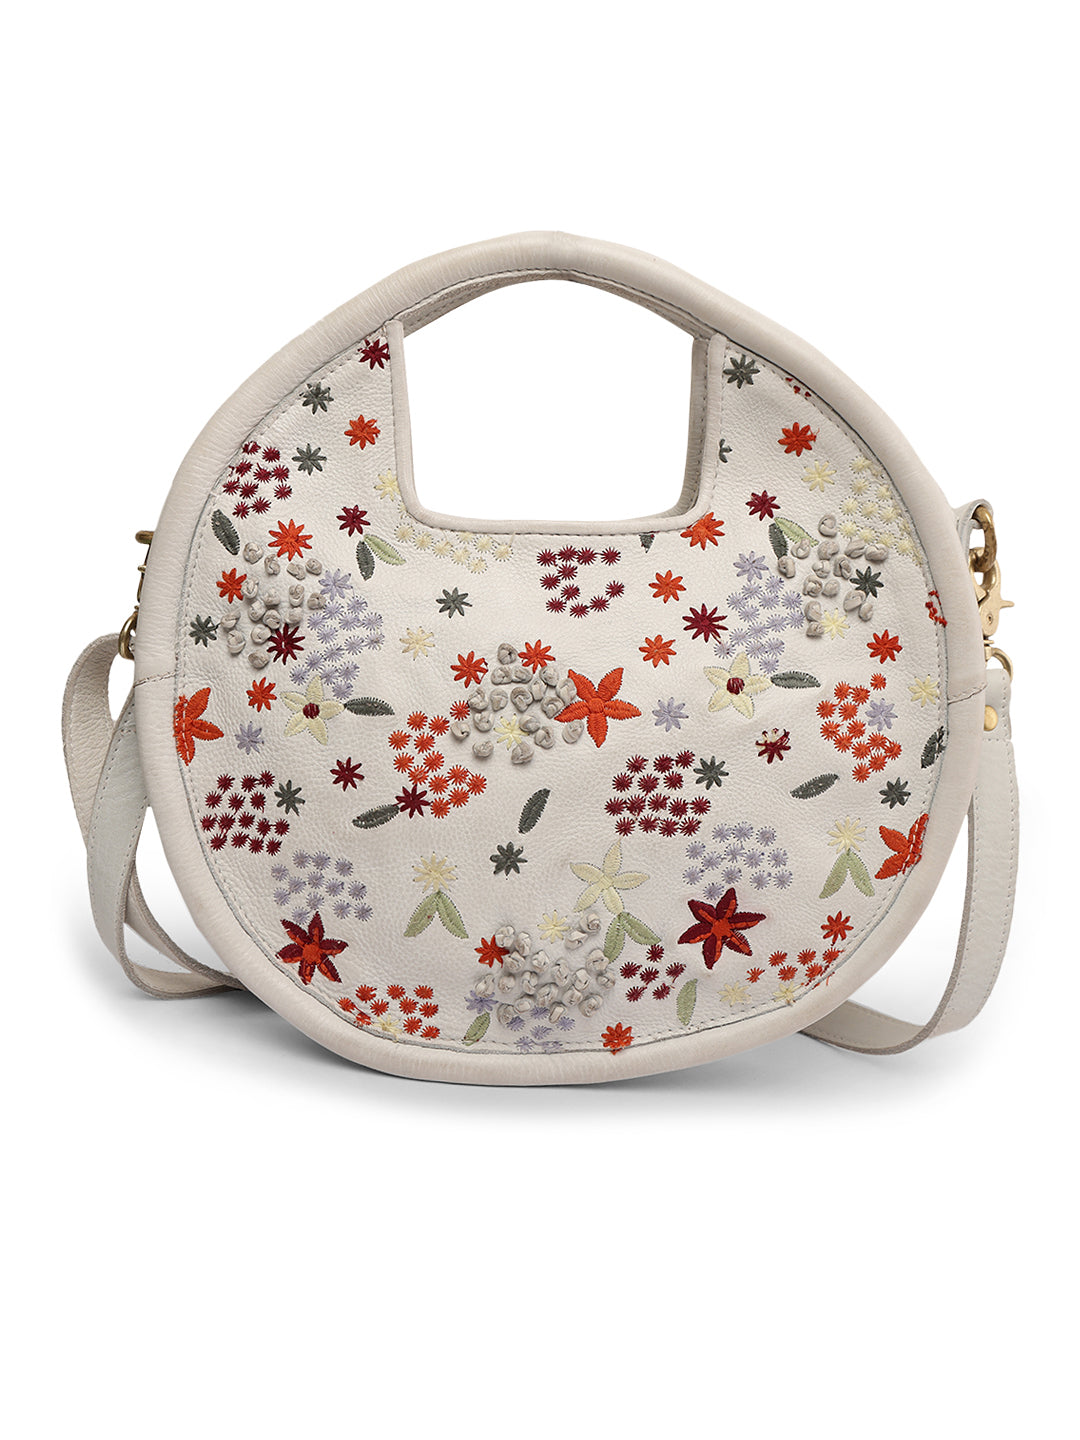 Floral Bliss: Round White Leather Handbag with Colorful Flower Embroidery